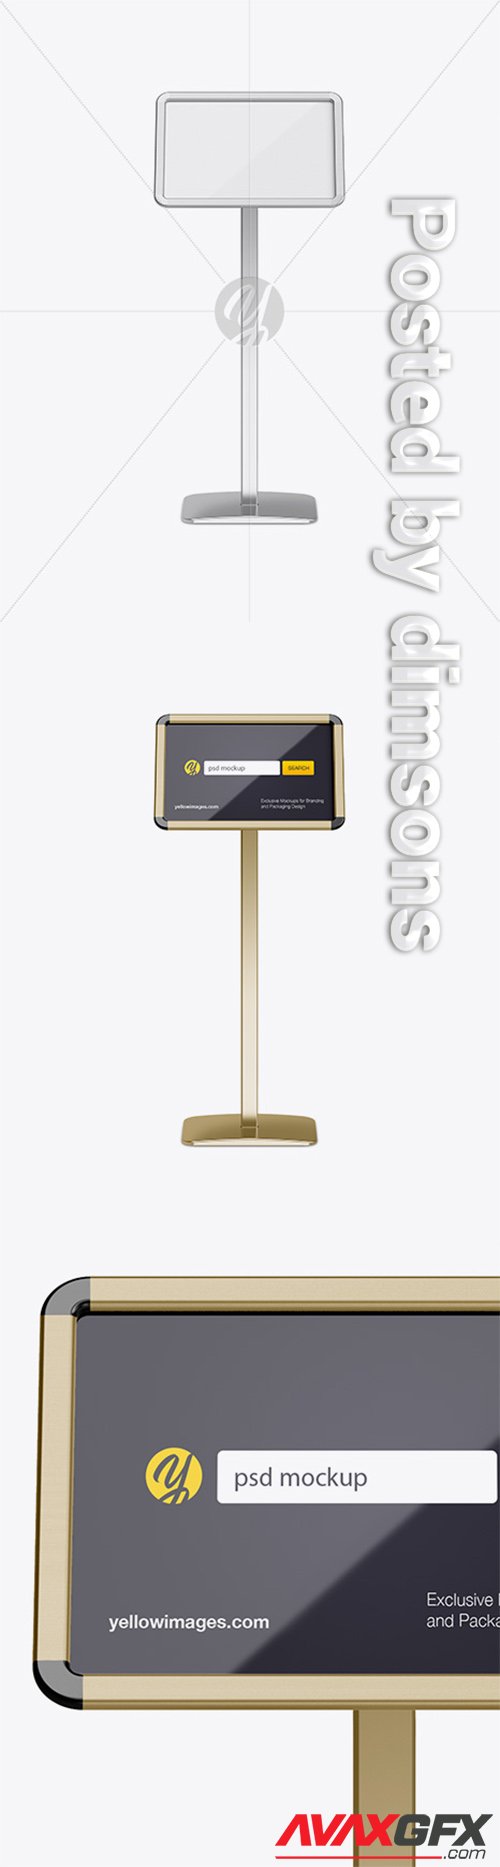 Metallic Frame Poster Stand Mockup - Front View 21149